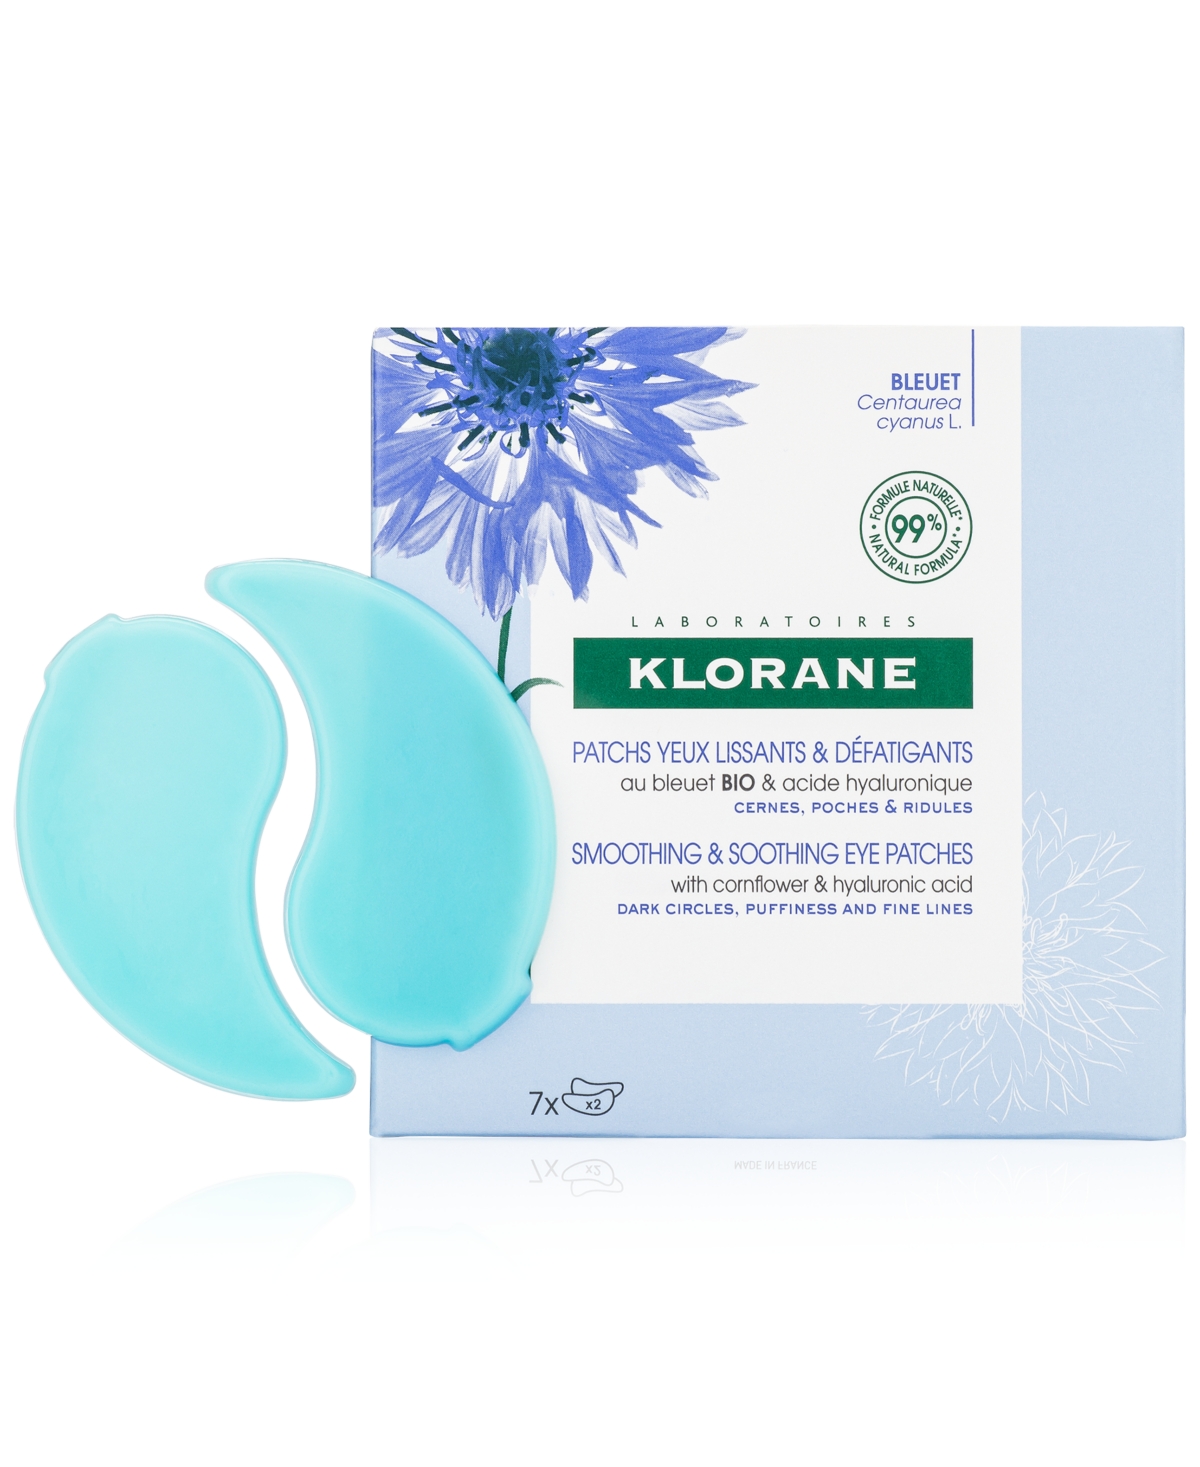 Klorane Smoothing & Soothing Eye Patches With Cornflower & Hyaluronic Acid, 7-Pk.